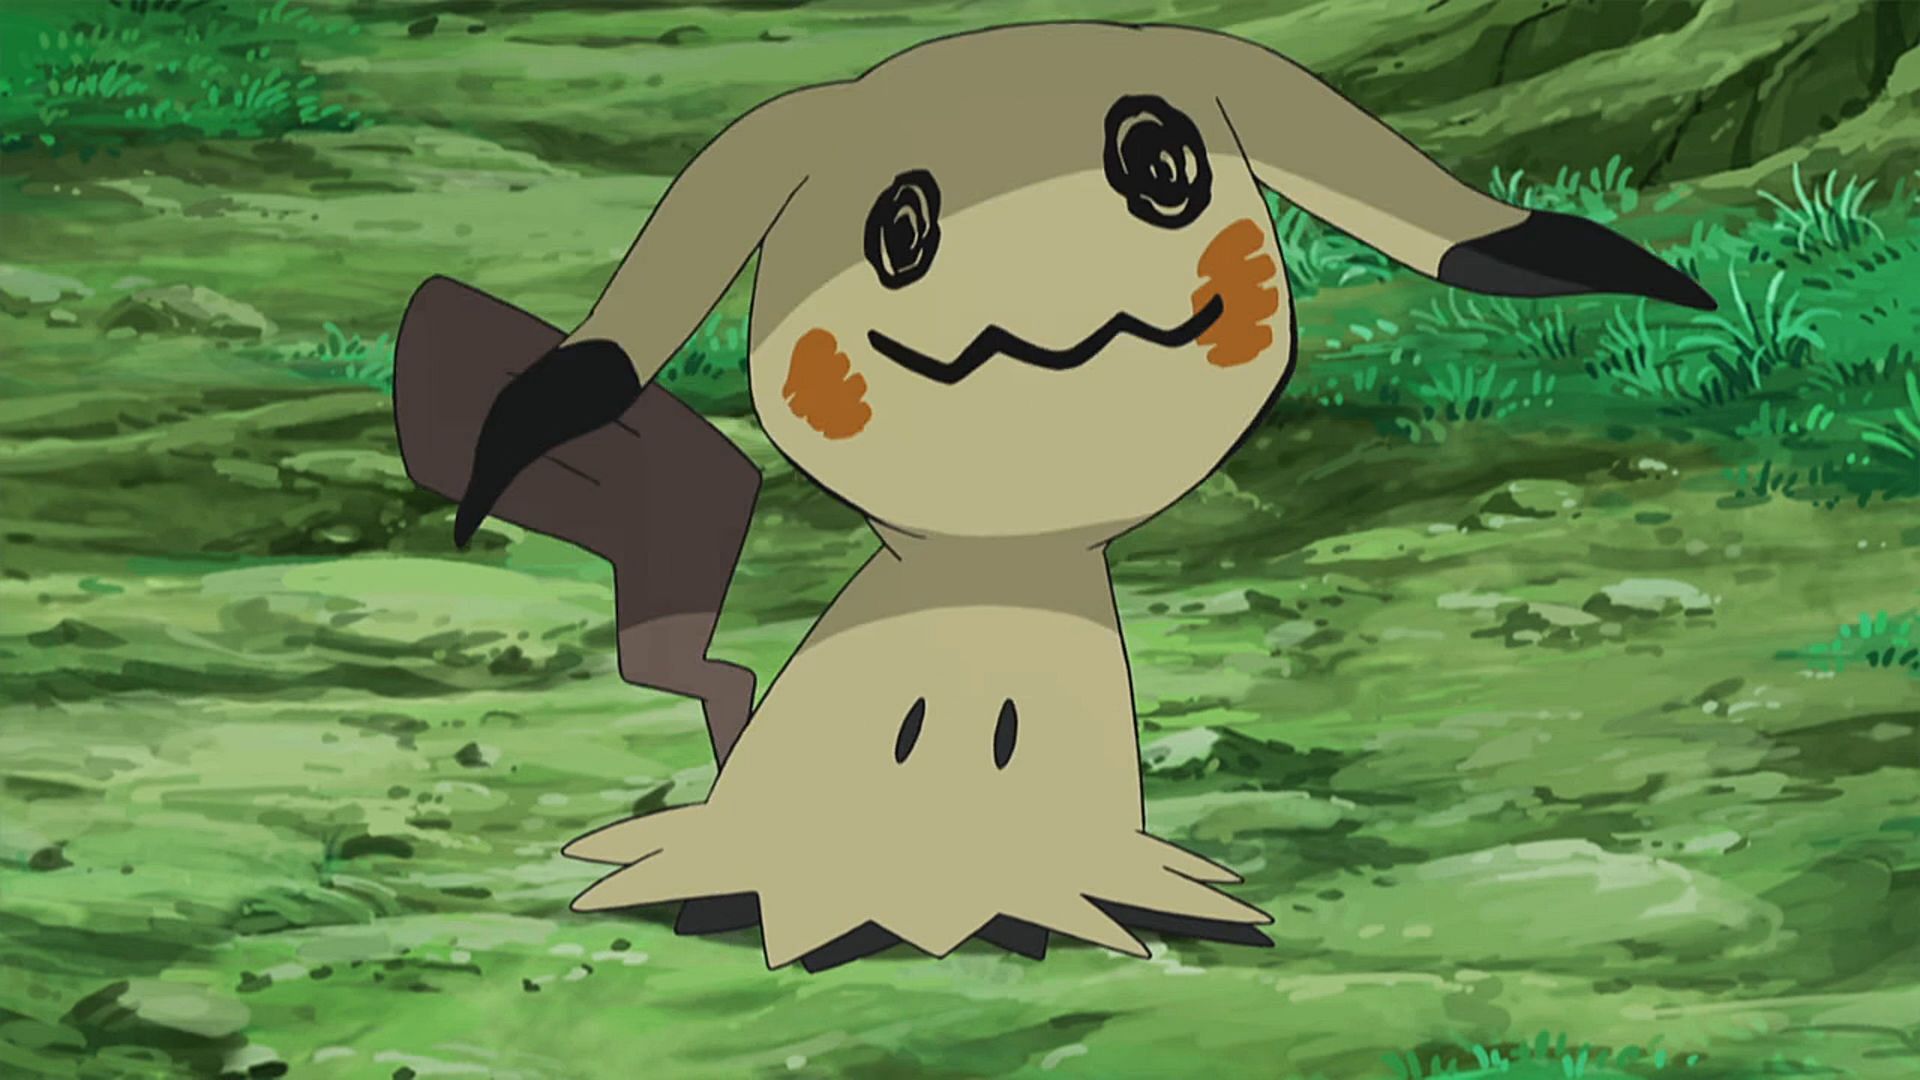 Mimikyu is ready to collect candies (Image credit: OLM Incorporated, Pokemon: Sun and Moon)